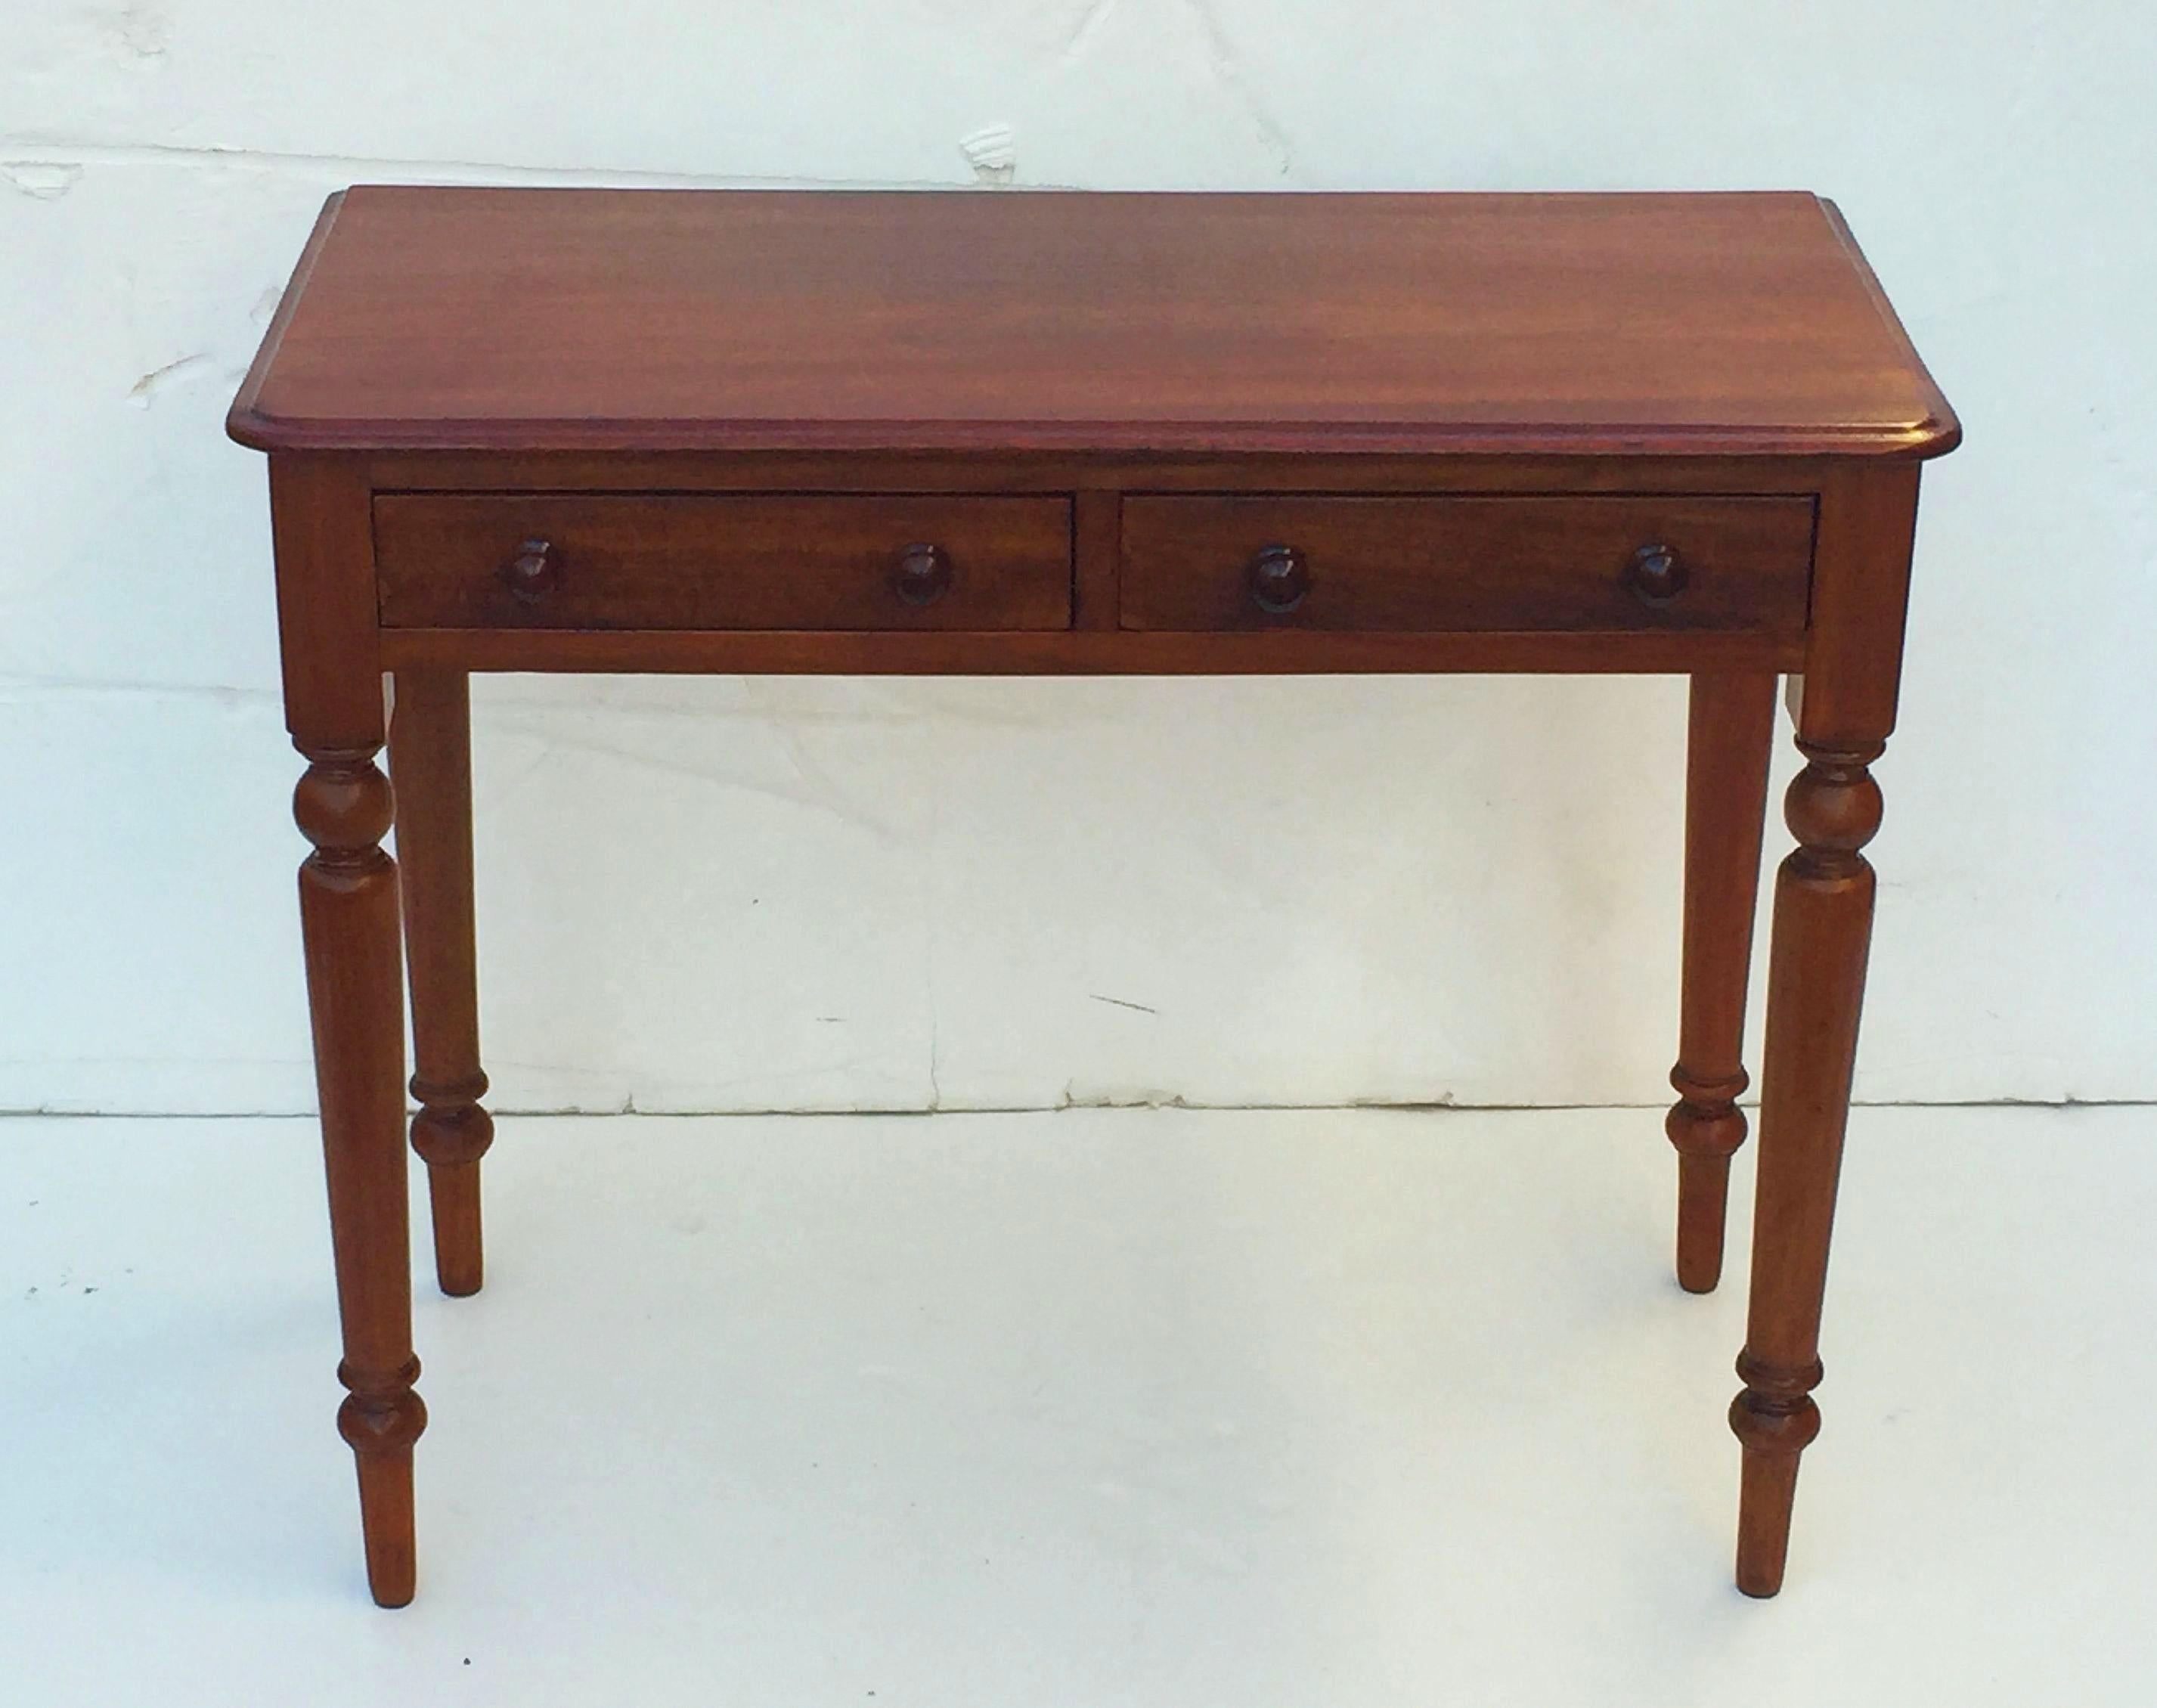 A fine English writing table or desk of mahogany featuring a rectangular moulded top over a frieze of two drawers, each drawer with two knob pulls,  and resting on turned legs.